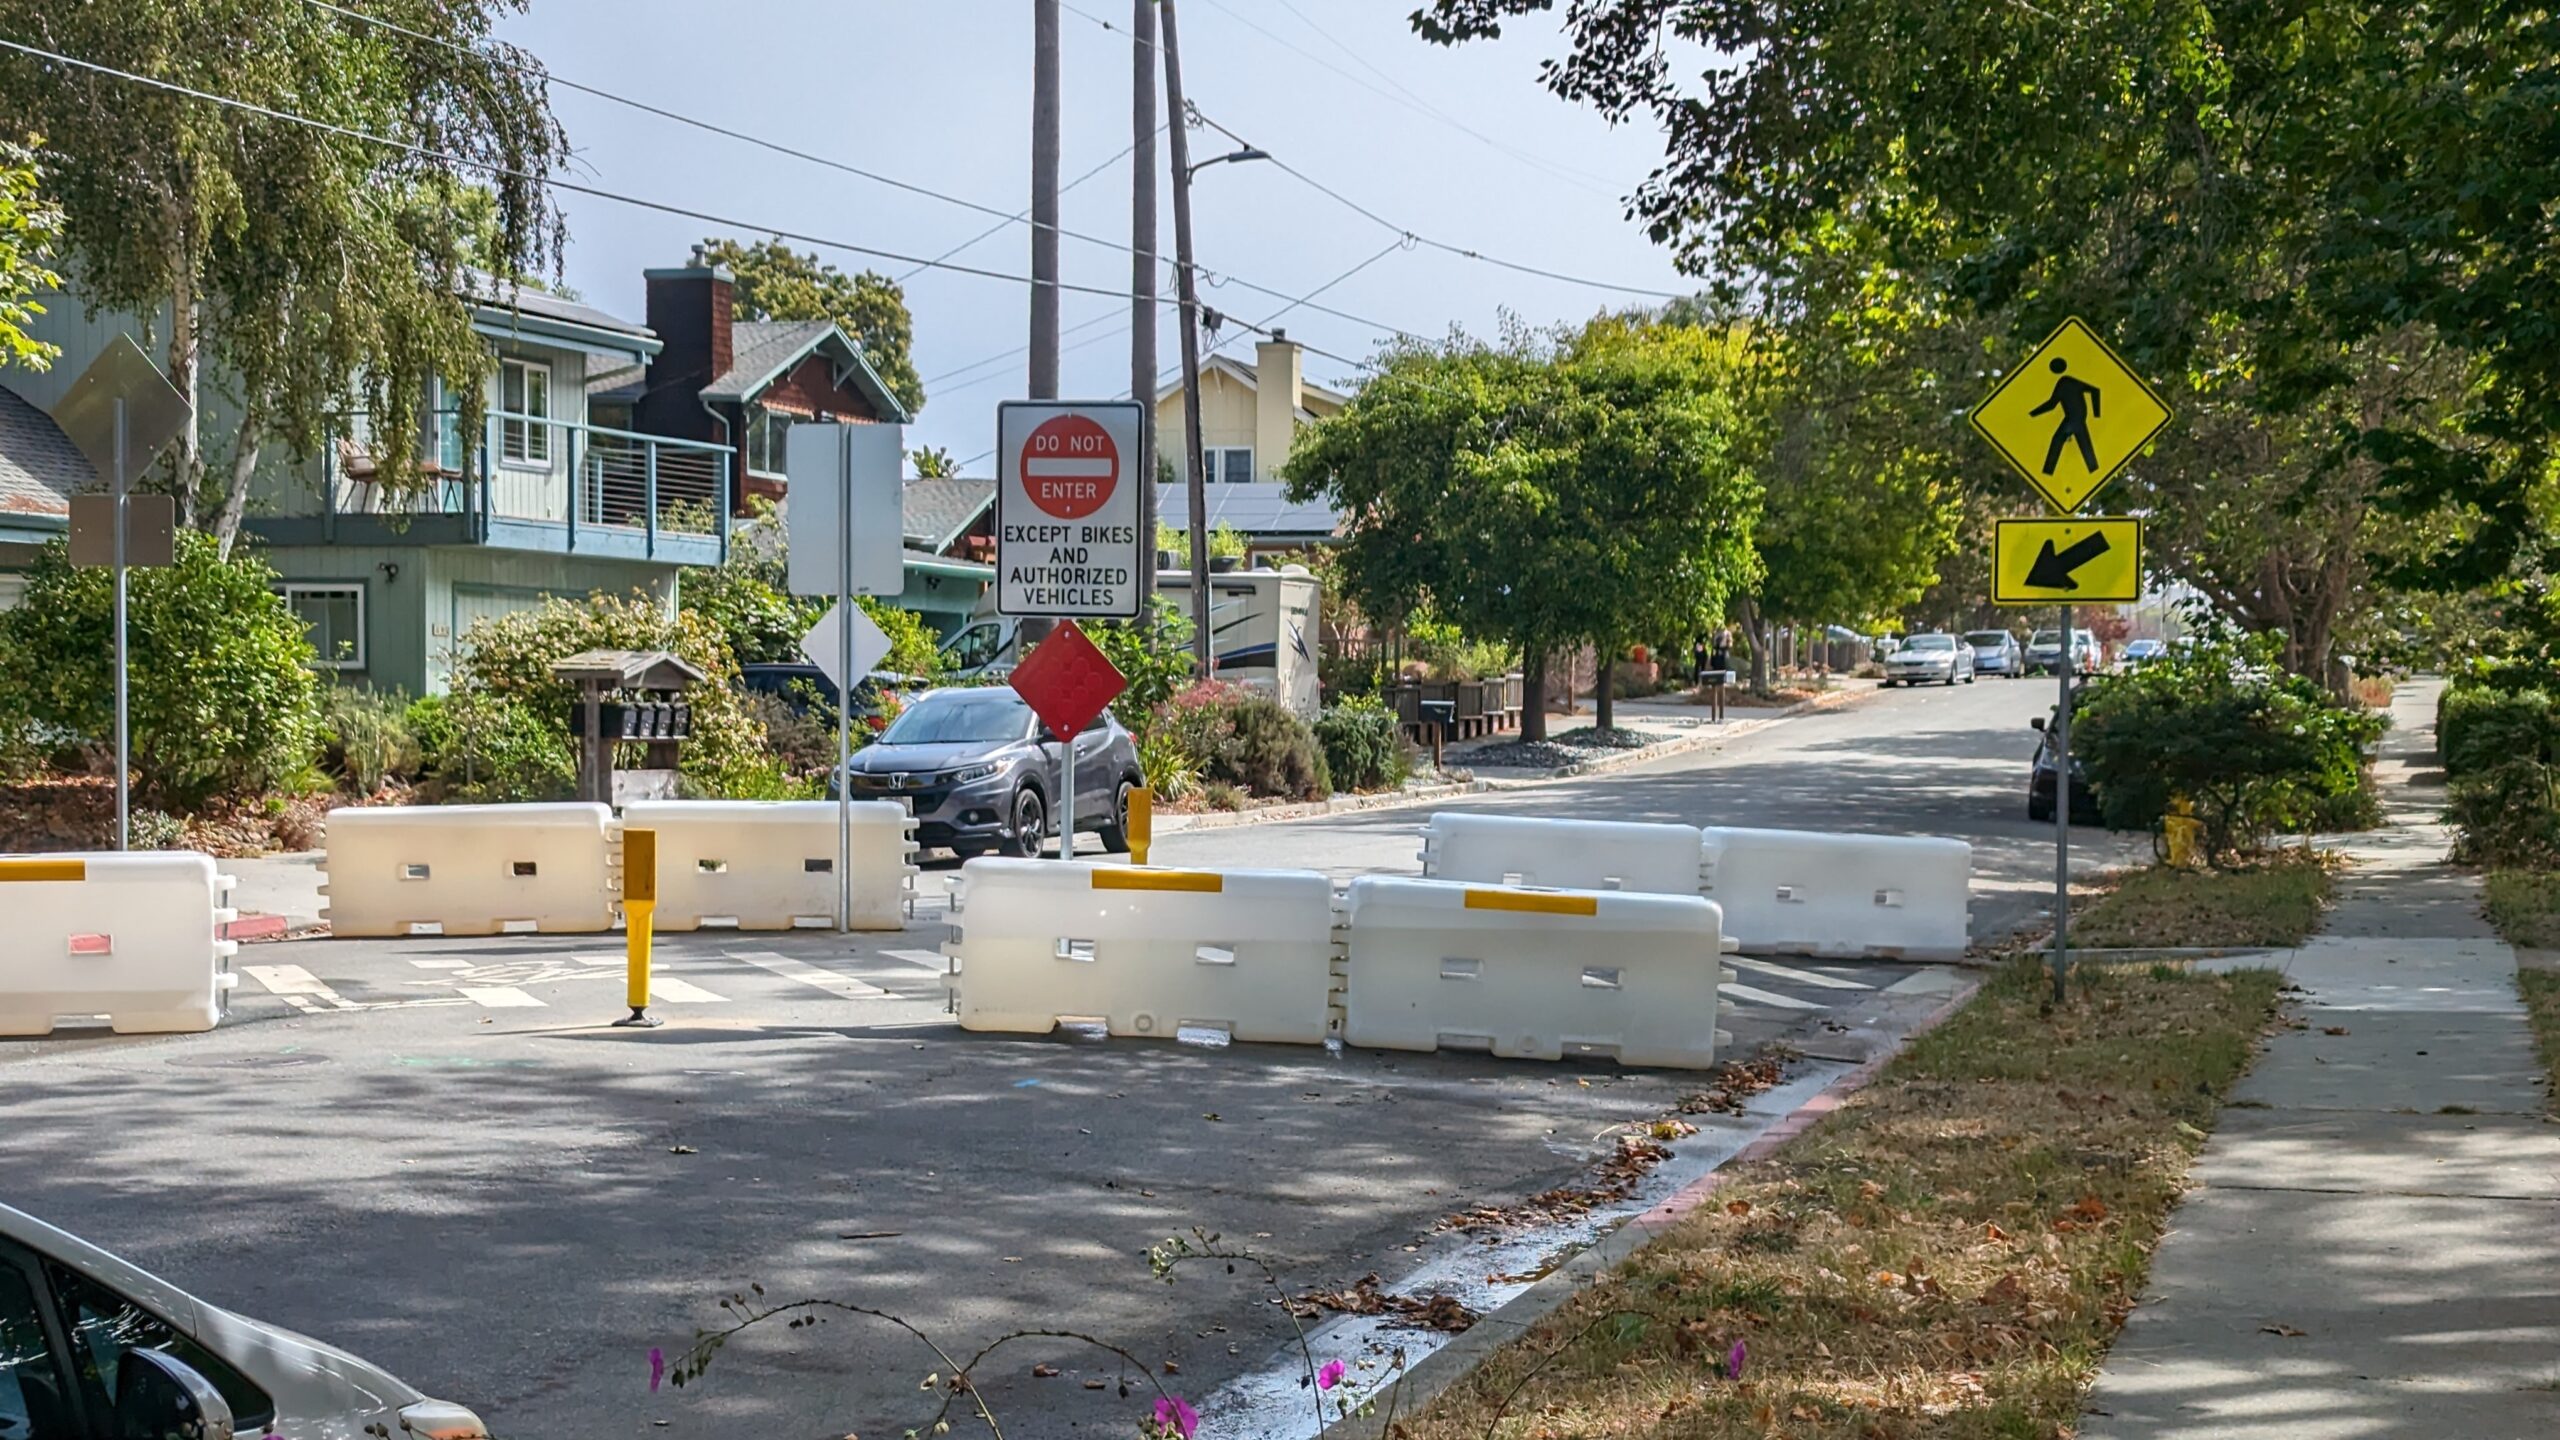 One block from detours on West Cliff Drive, barriers separate Alta Avenue at Bethany Curve to try to reduce traffic in the neighborhood.